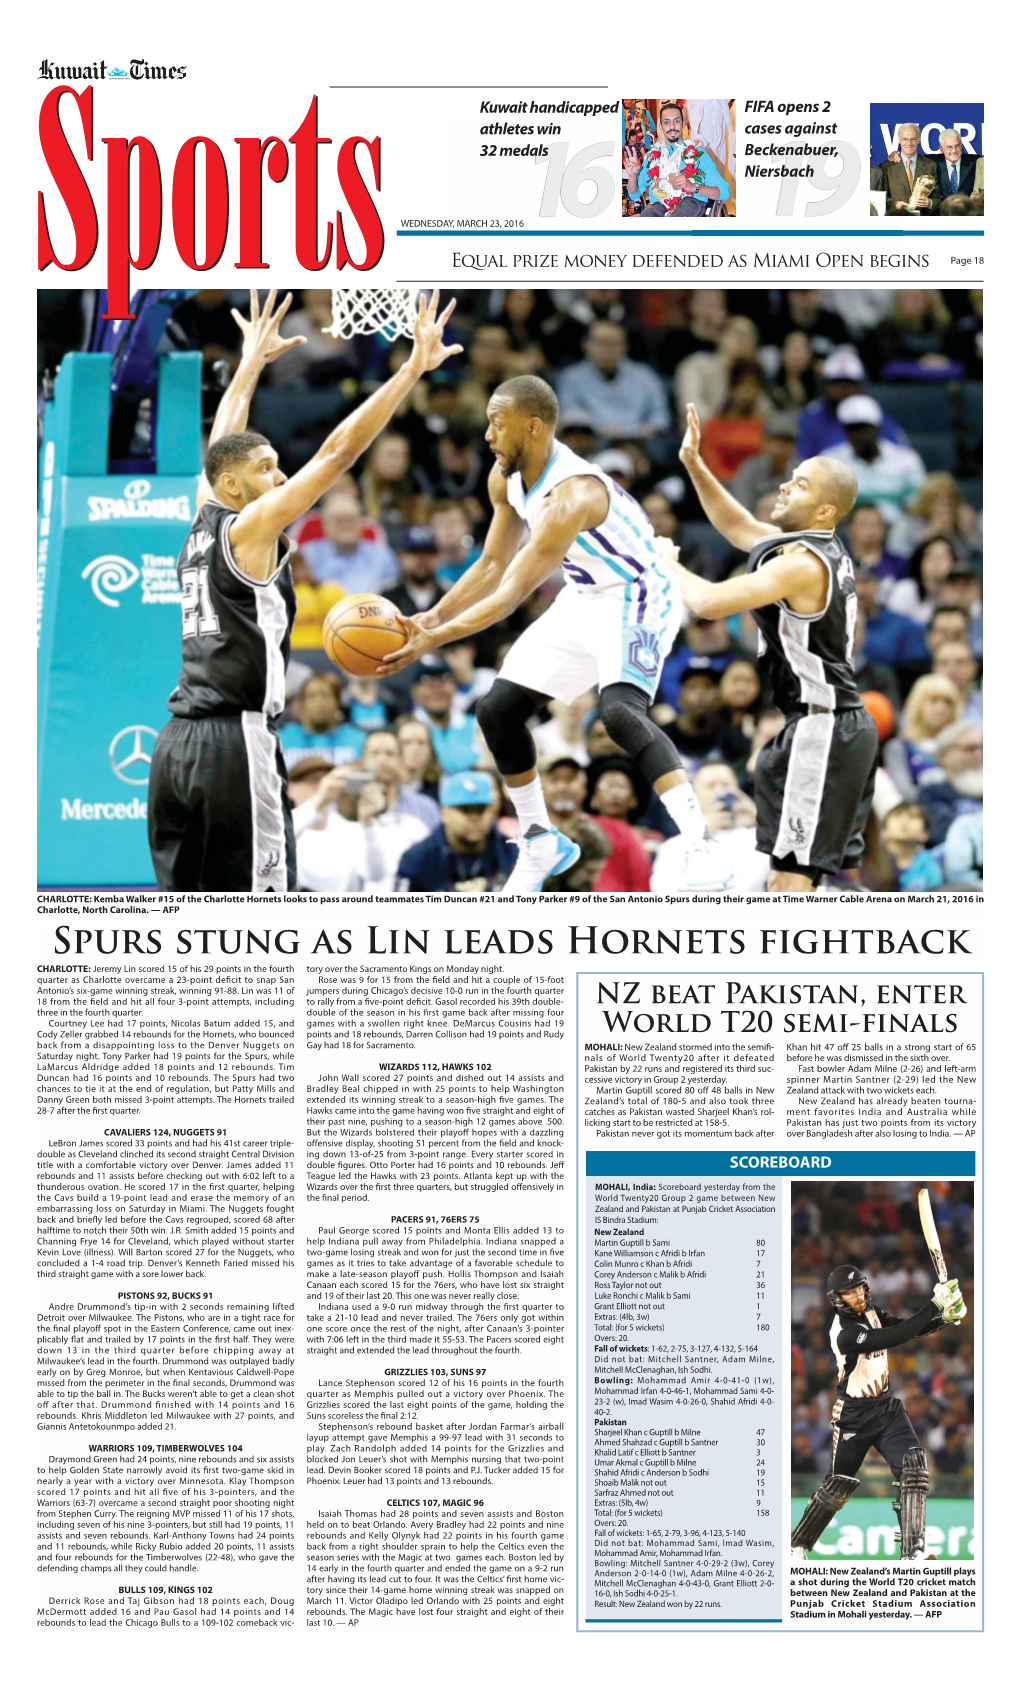 Spurs Stung As Lin Leads Hornets Fightback